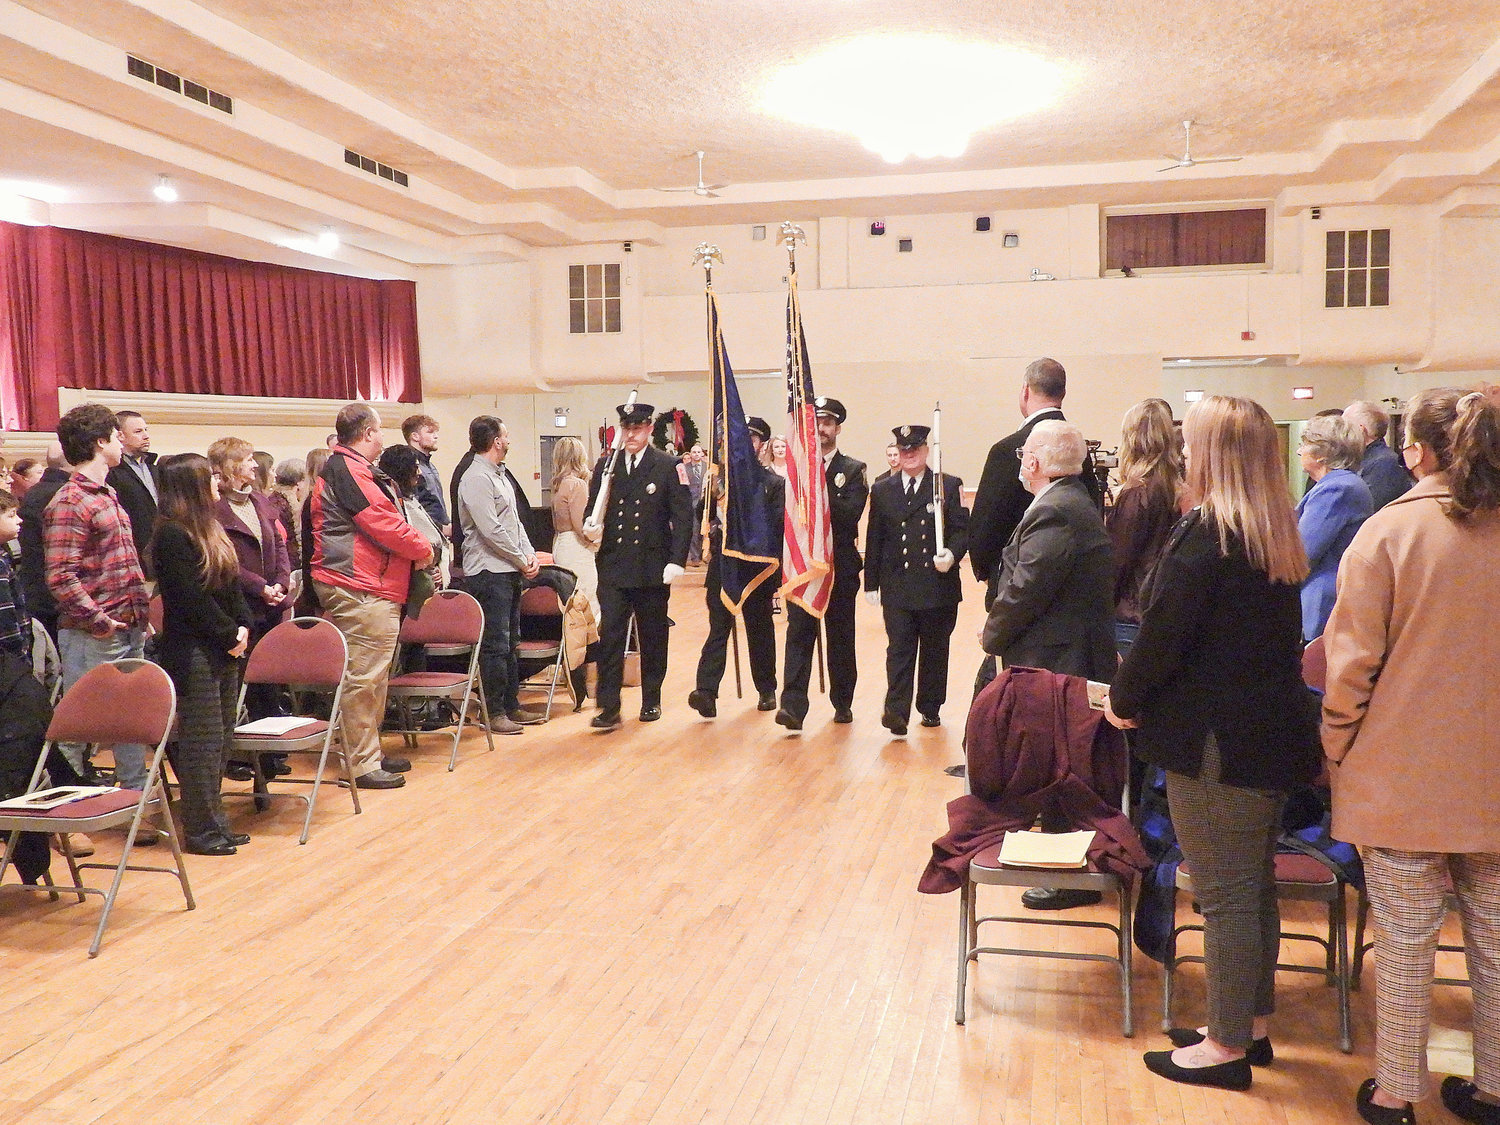 COLOR GUARD — The Oneida City Joint Color Guard kicks off the city of Oneida inauguration event on Sunday, Jan. 2 at the Kallet Civic Center. The Joint Color Guard consists of Christopher Gregory and Tyler Isles of the City Of Oneida Police Department and Jeremy Carnahan and Brian Burkle of the City of Oneida Fire Department.